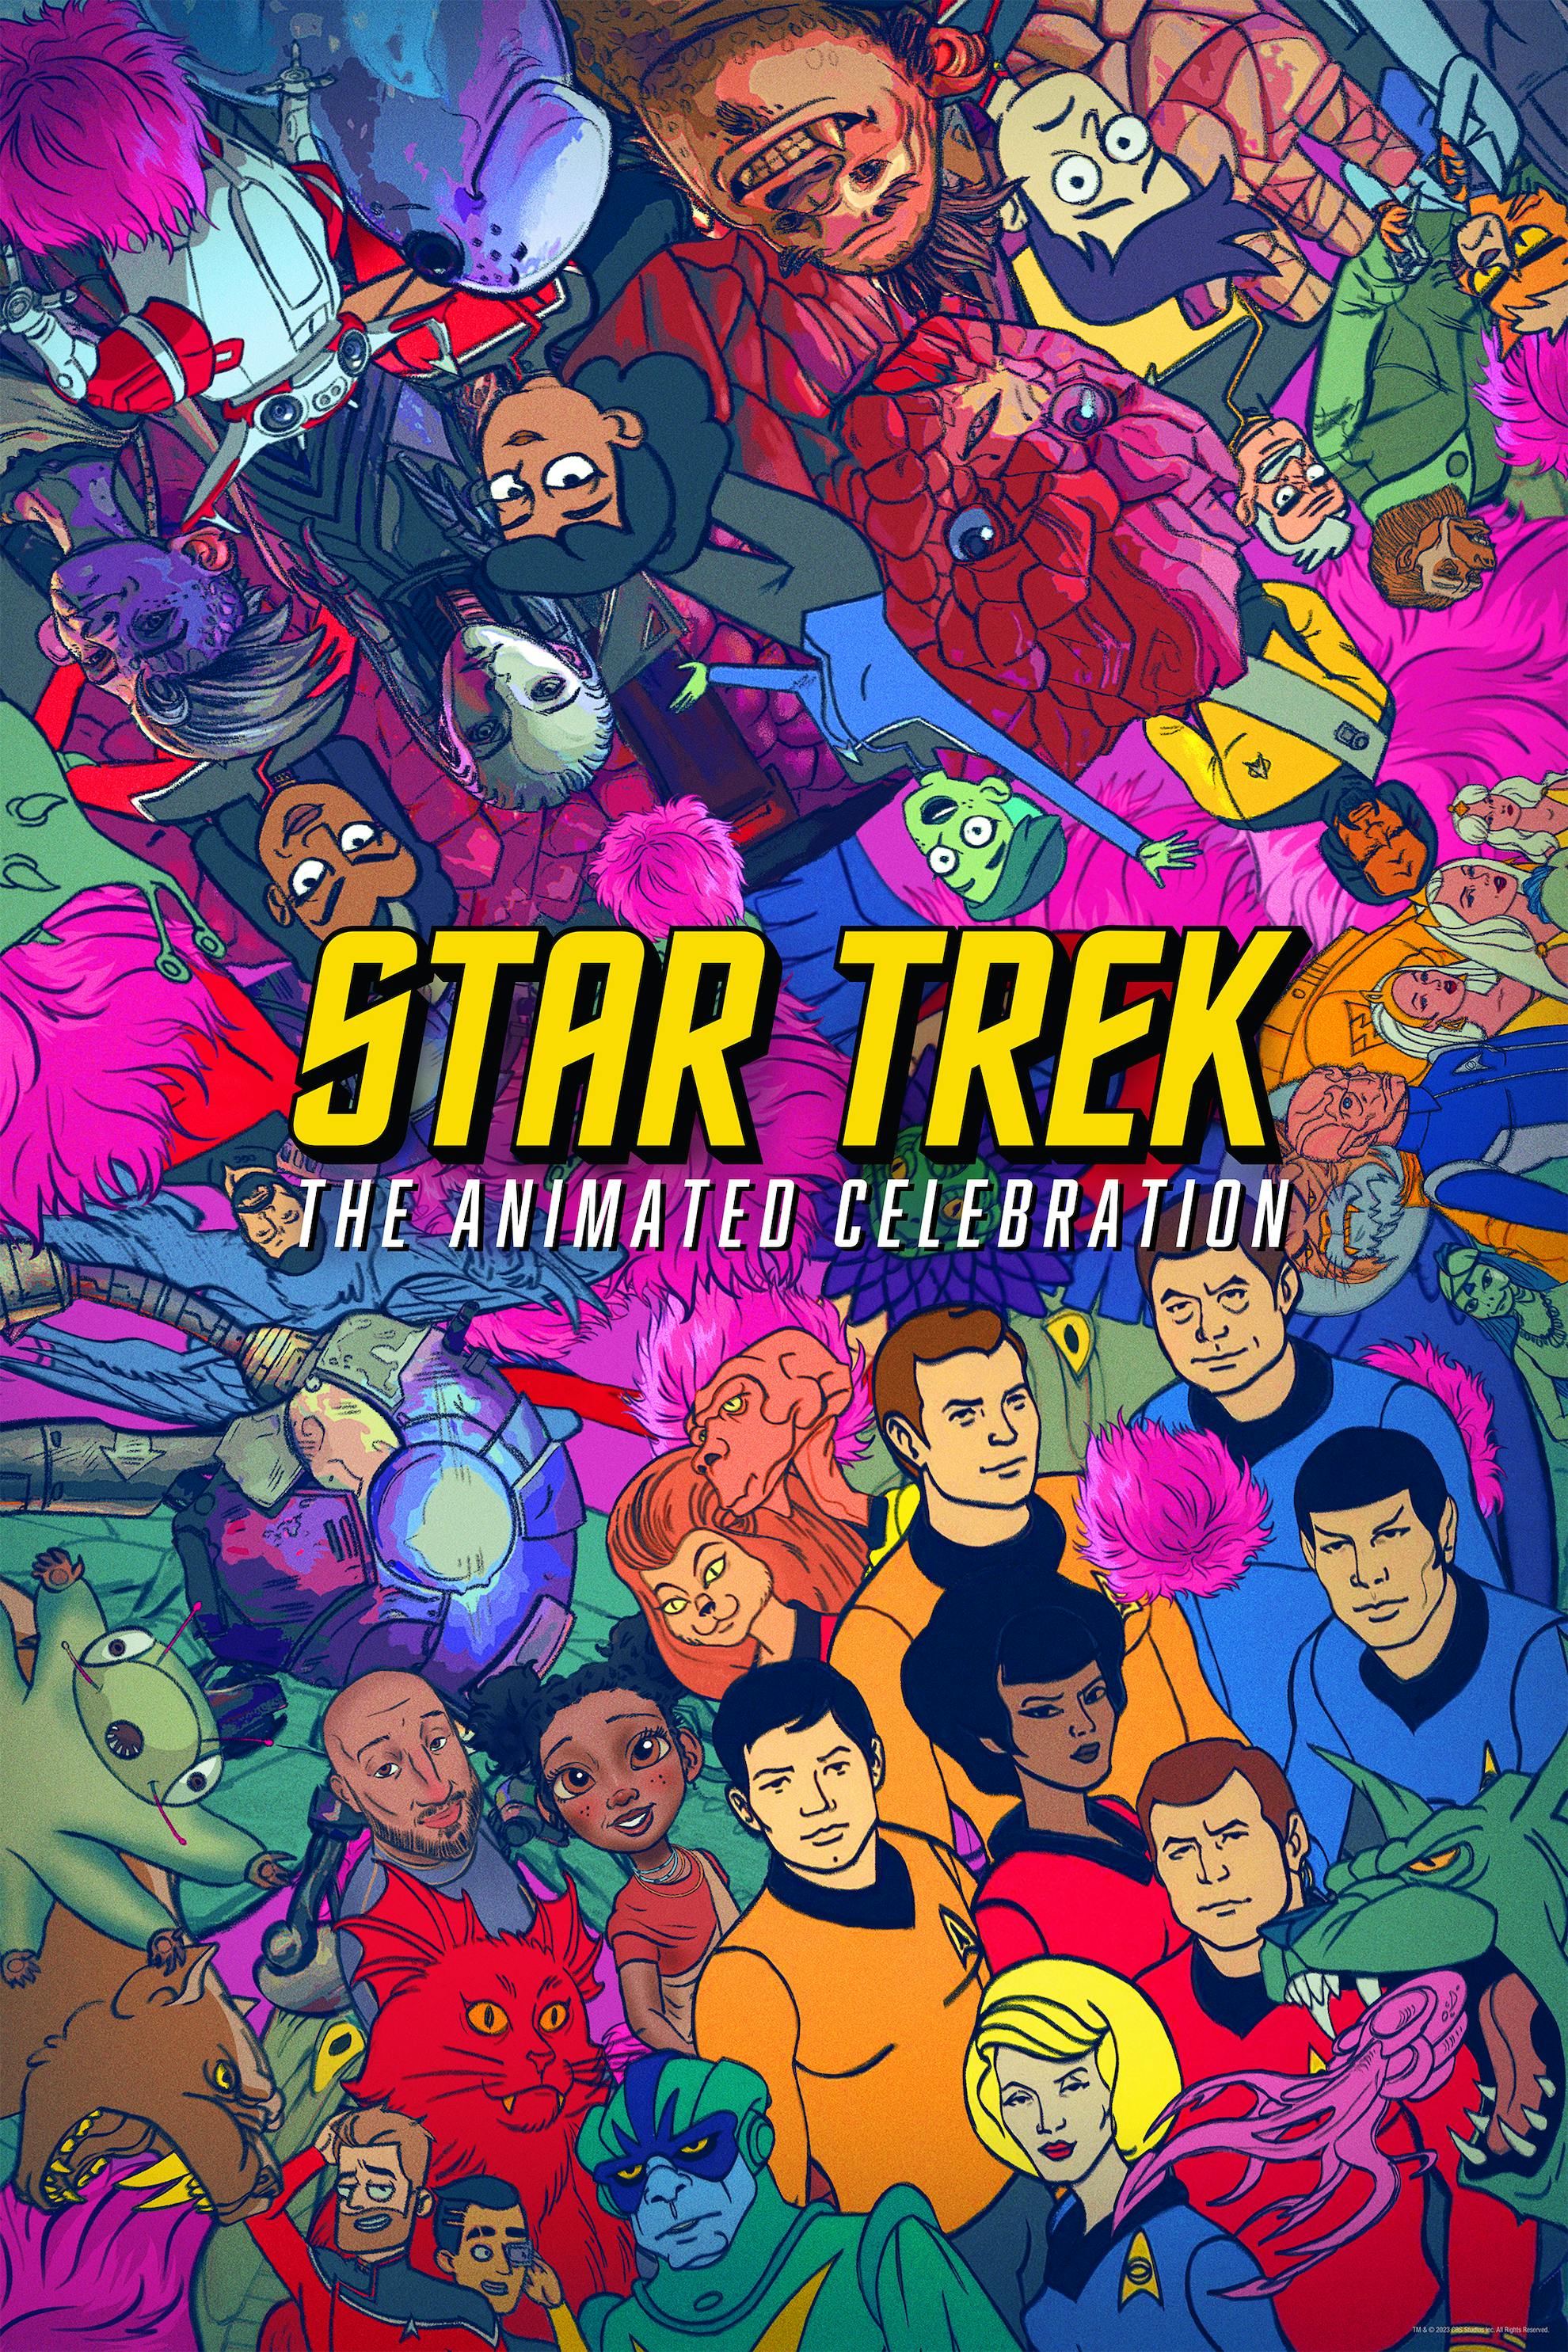 Star Trek: The Animated Celebration Poster featuring characters across the Star Trek universe in their animated form